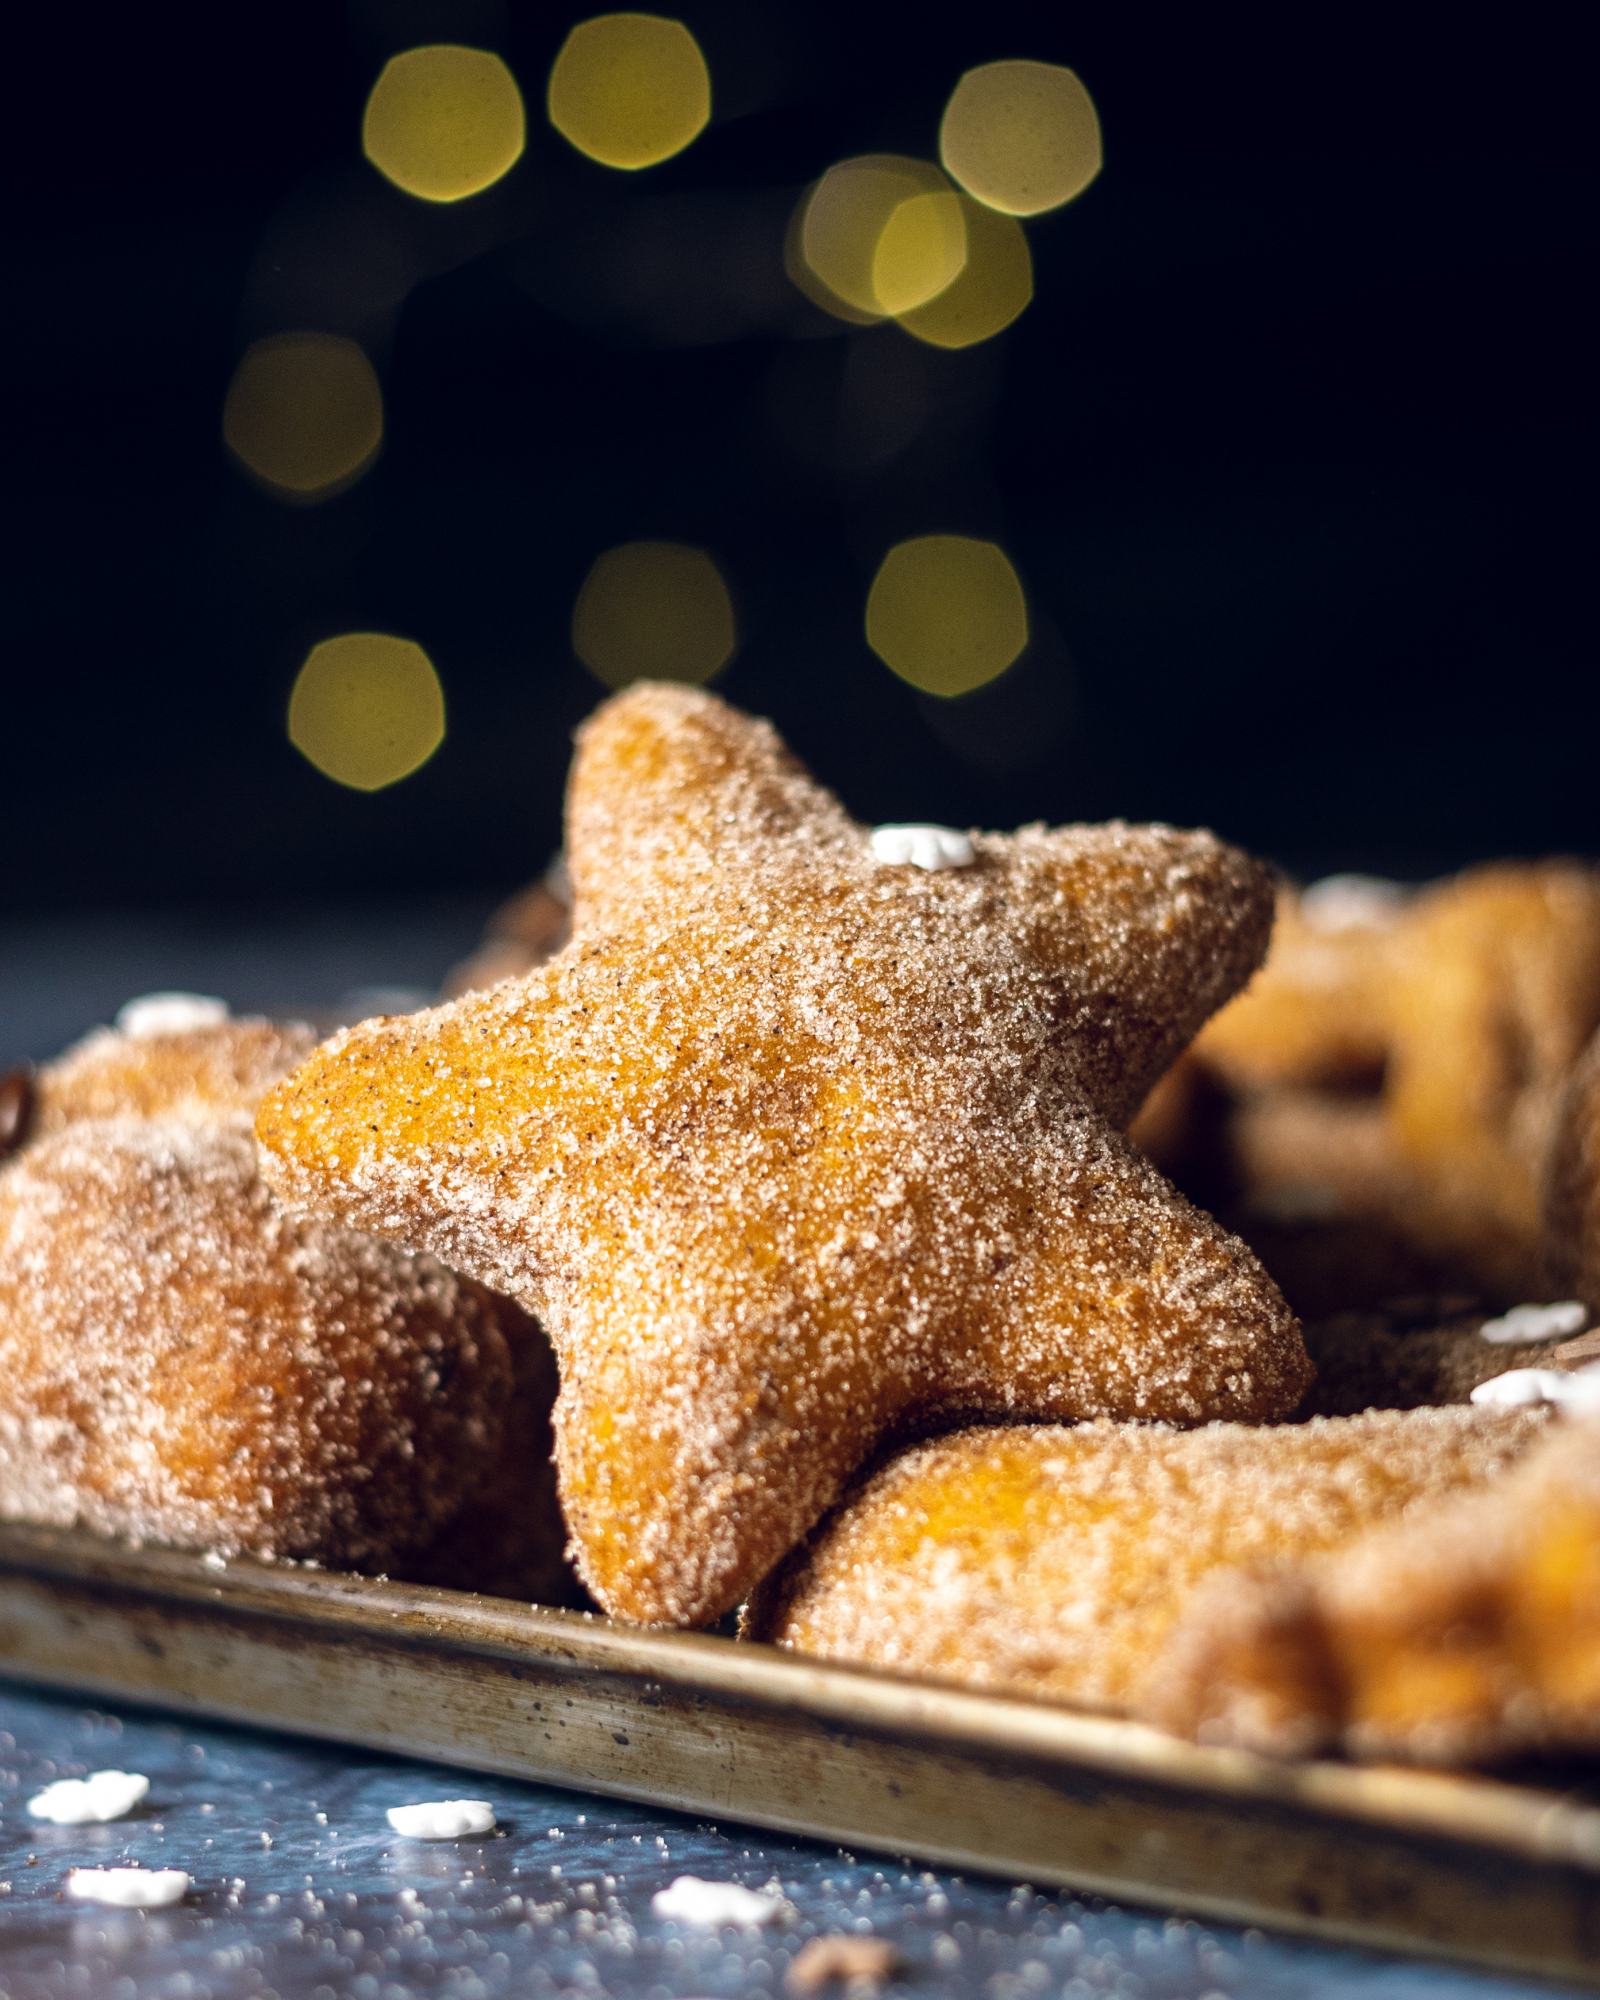 A star shaped vegan cinnamon donut the edge of a baking tray filled with donuts and there are fairy lights visible in the background.